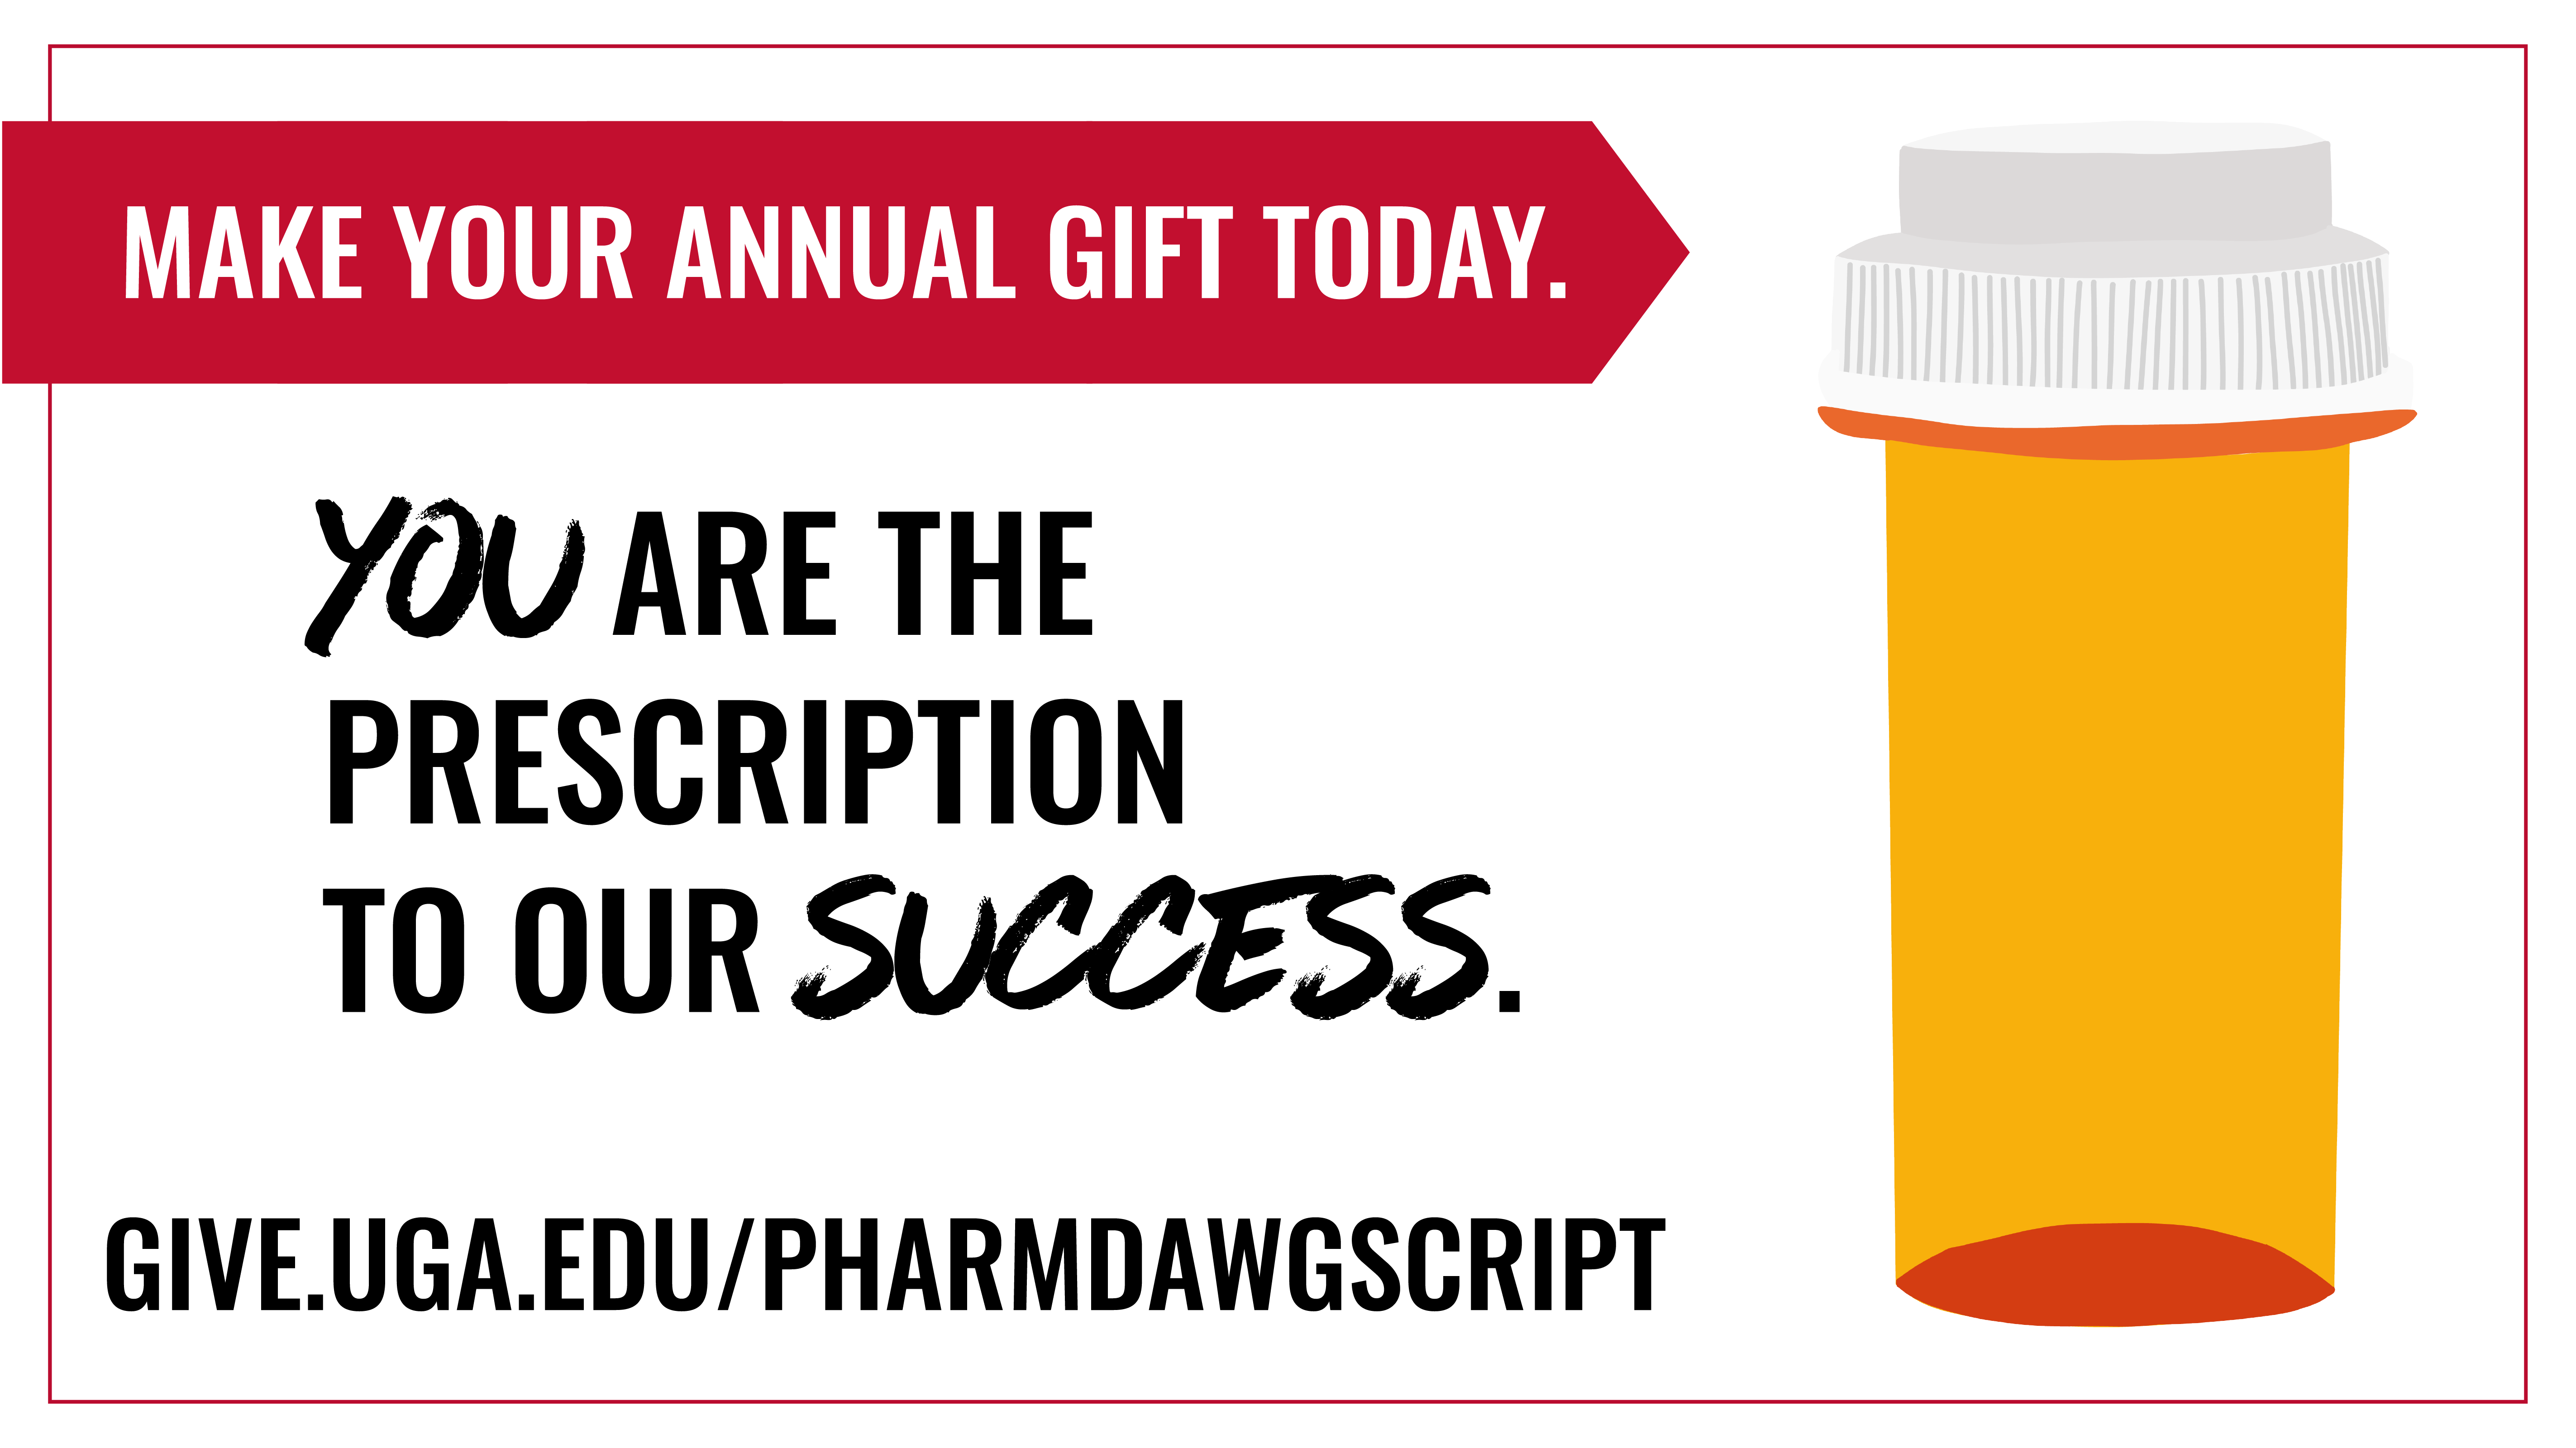 Enhance the College of Pharmacy with Your Annual Gift